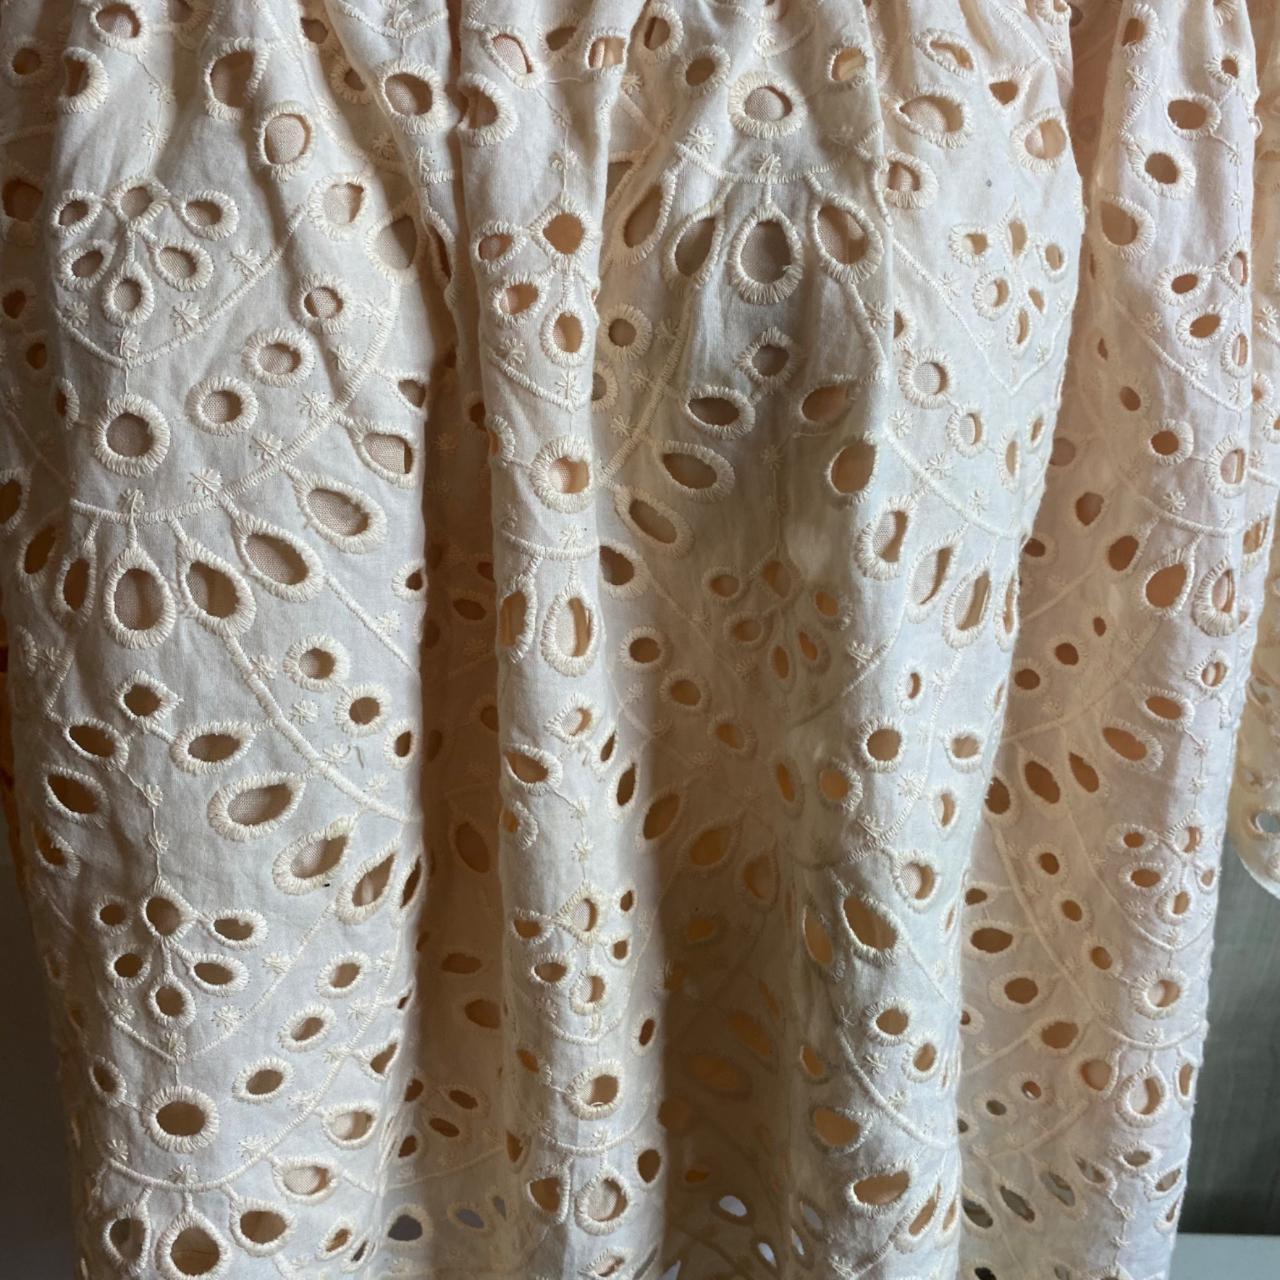 Product Image 3 - MINISTRY OF STYLE TOP

EYELET

PEACH IN